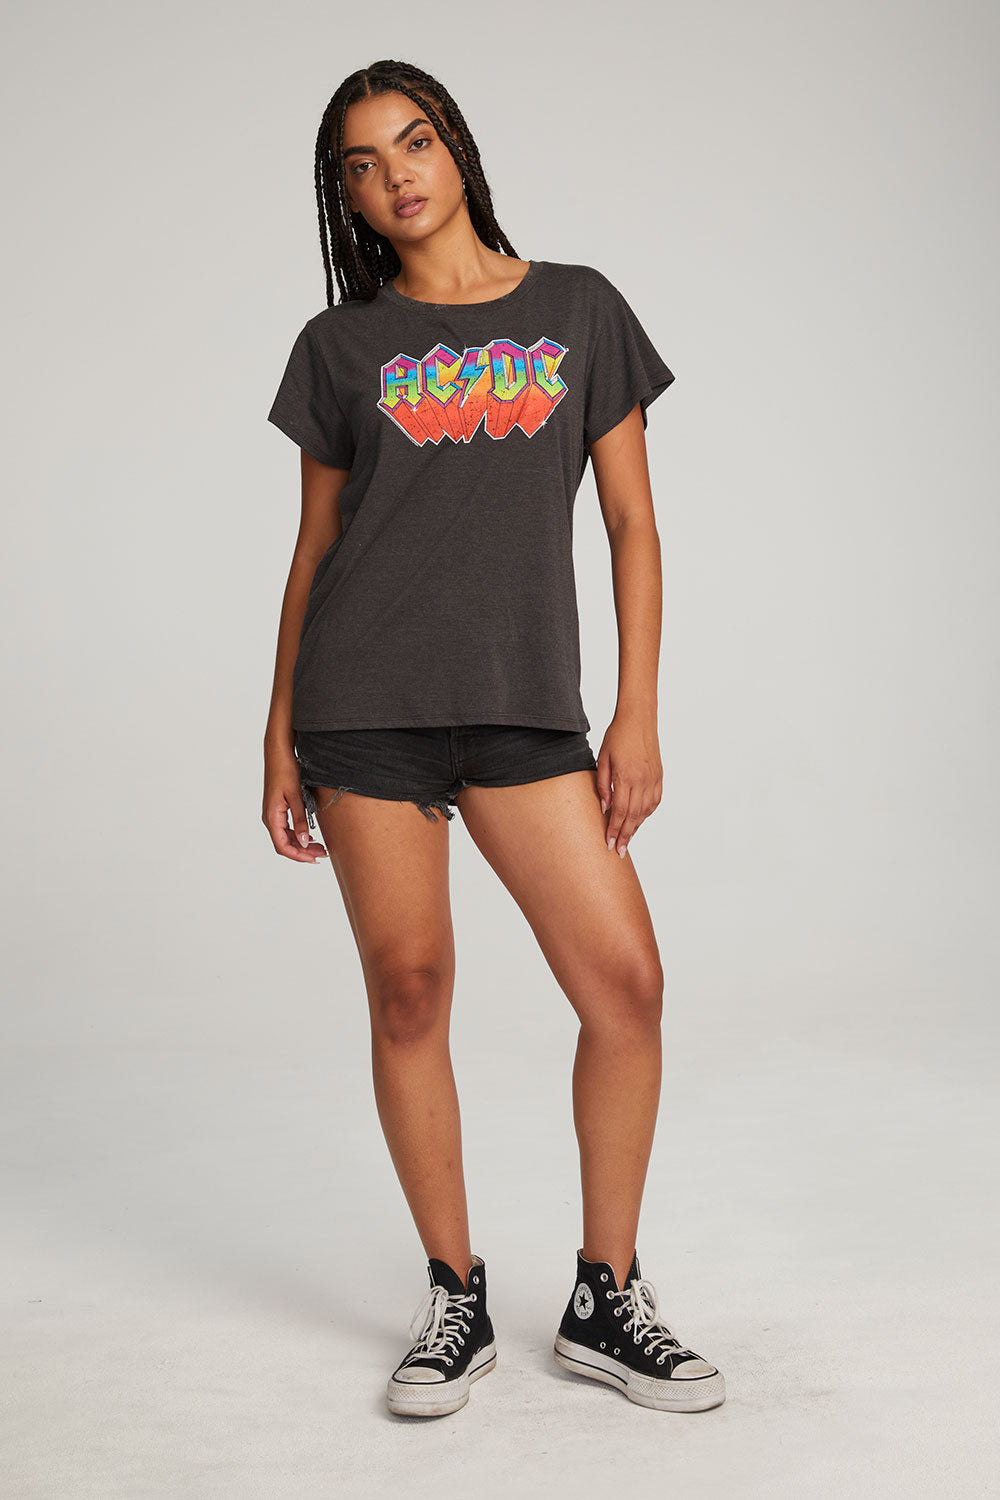 AC/DC Classic Logo Tee WOMENS chaserbrand